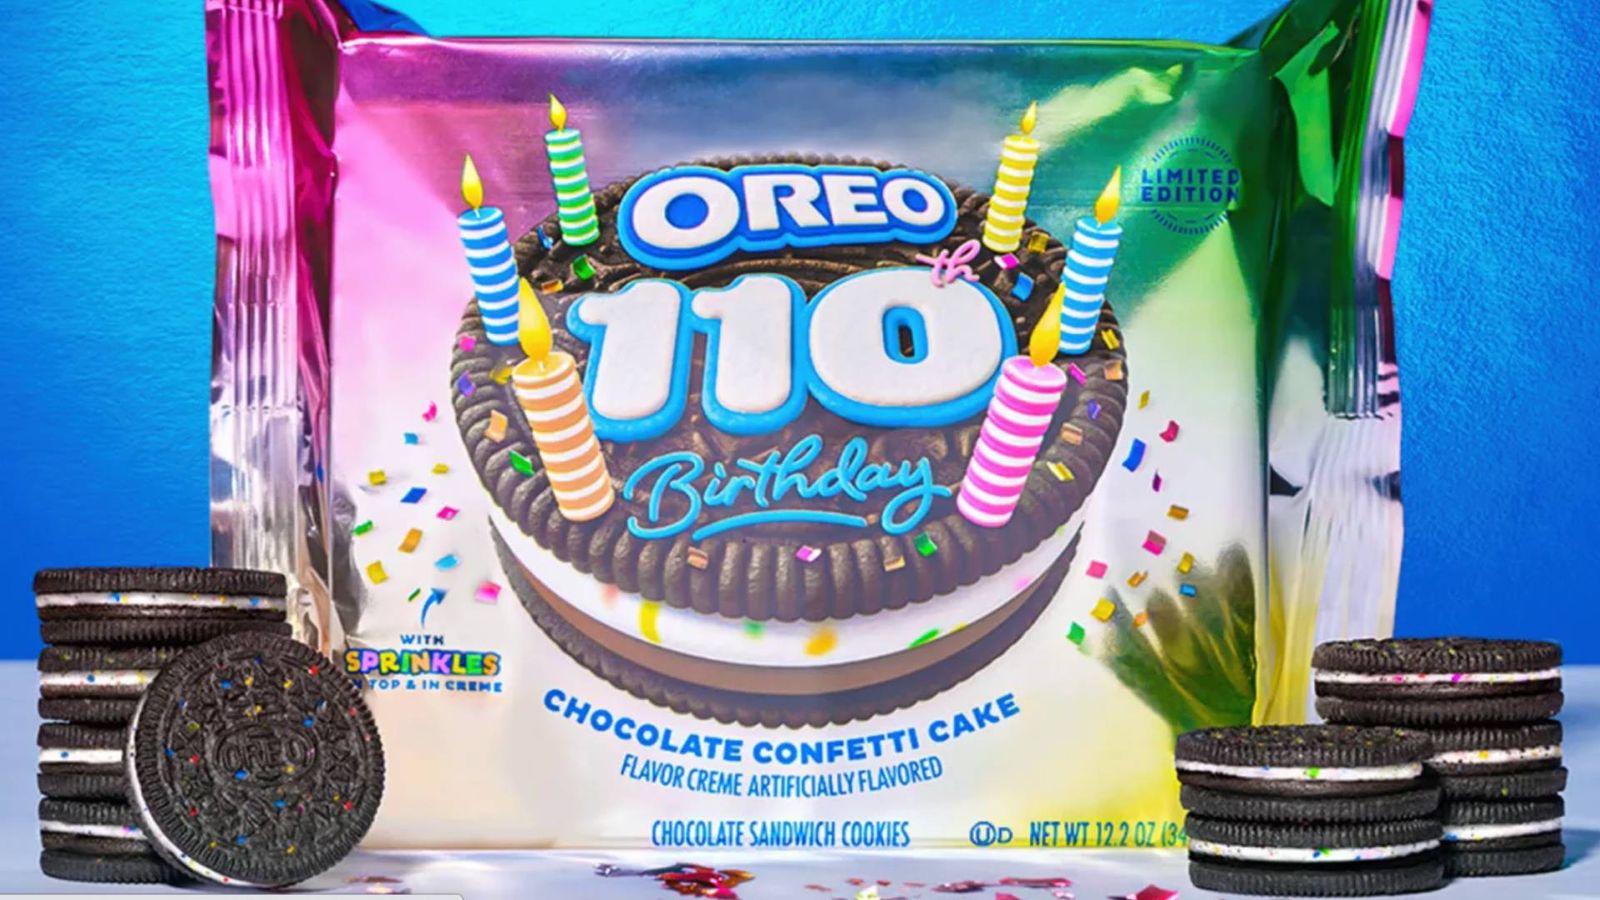 A new Oreo flavor is being released Woman & Home